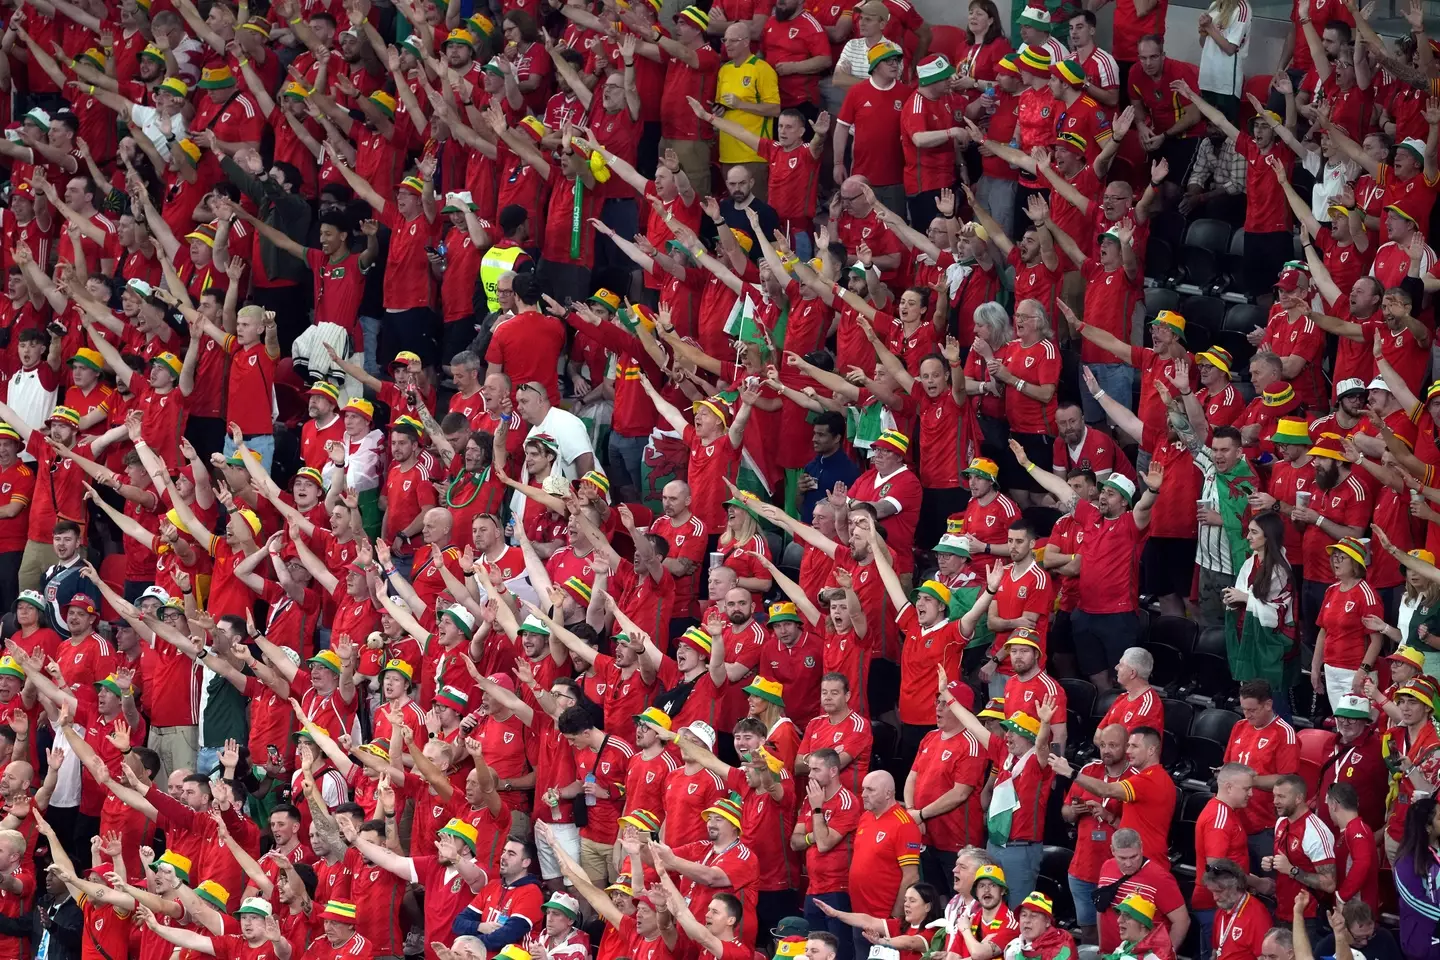 Thousands of Wales fans have travelled to Qatar for their first World Cup in 64 years.